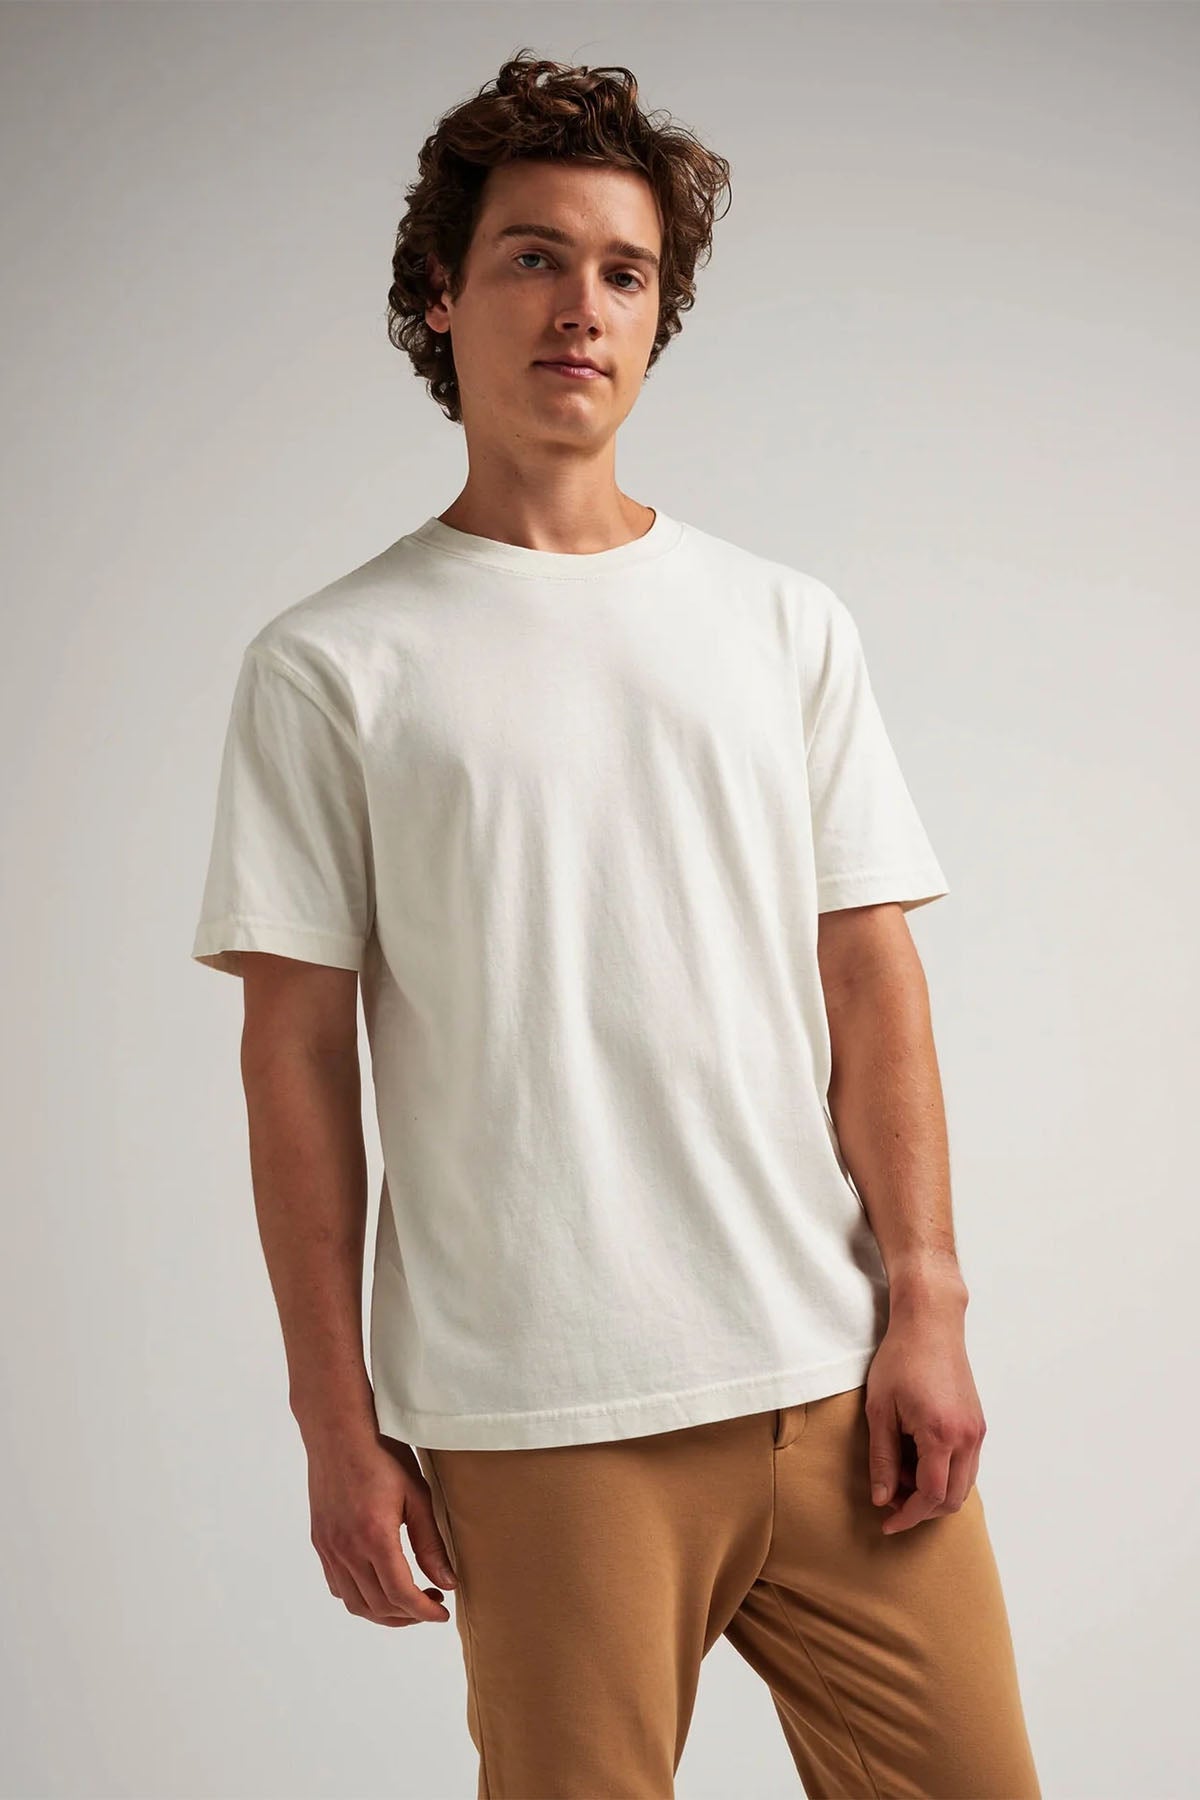 Richer Poorer - Relaxed SS Tee - Bone - Front